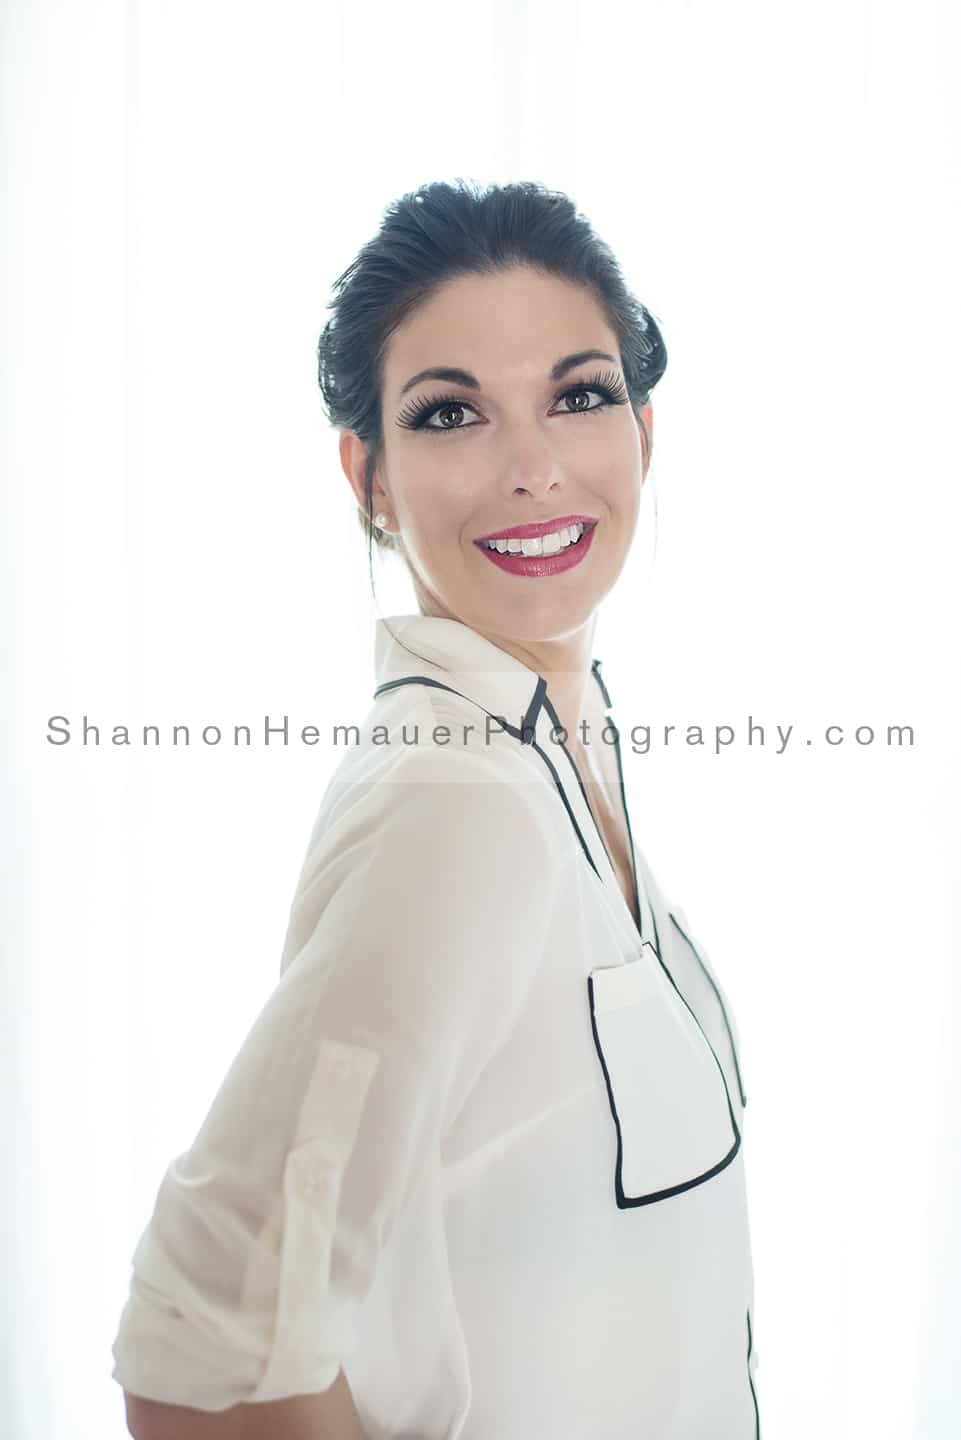 Contemporary Glamour | Shannon Hemauer Photography Gettysburg PA